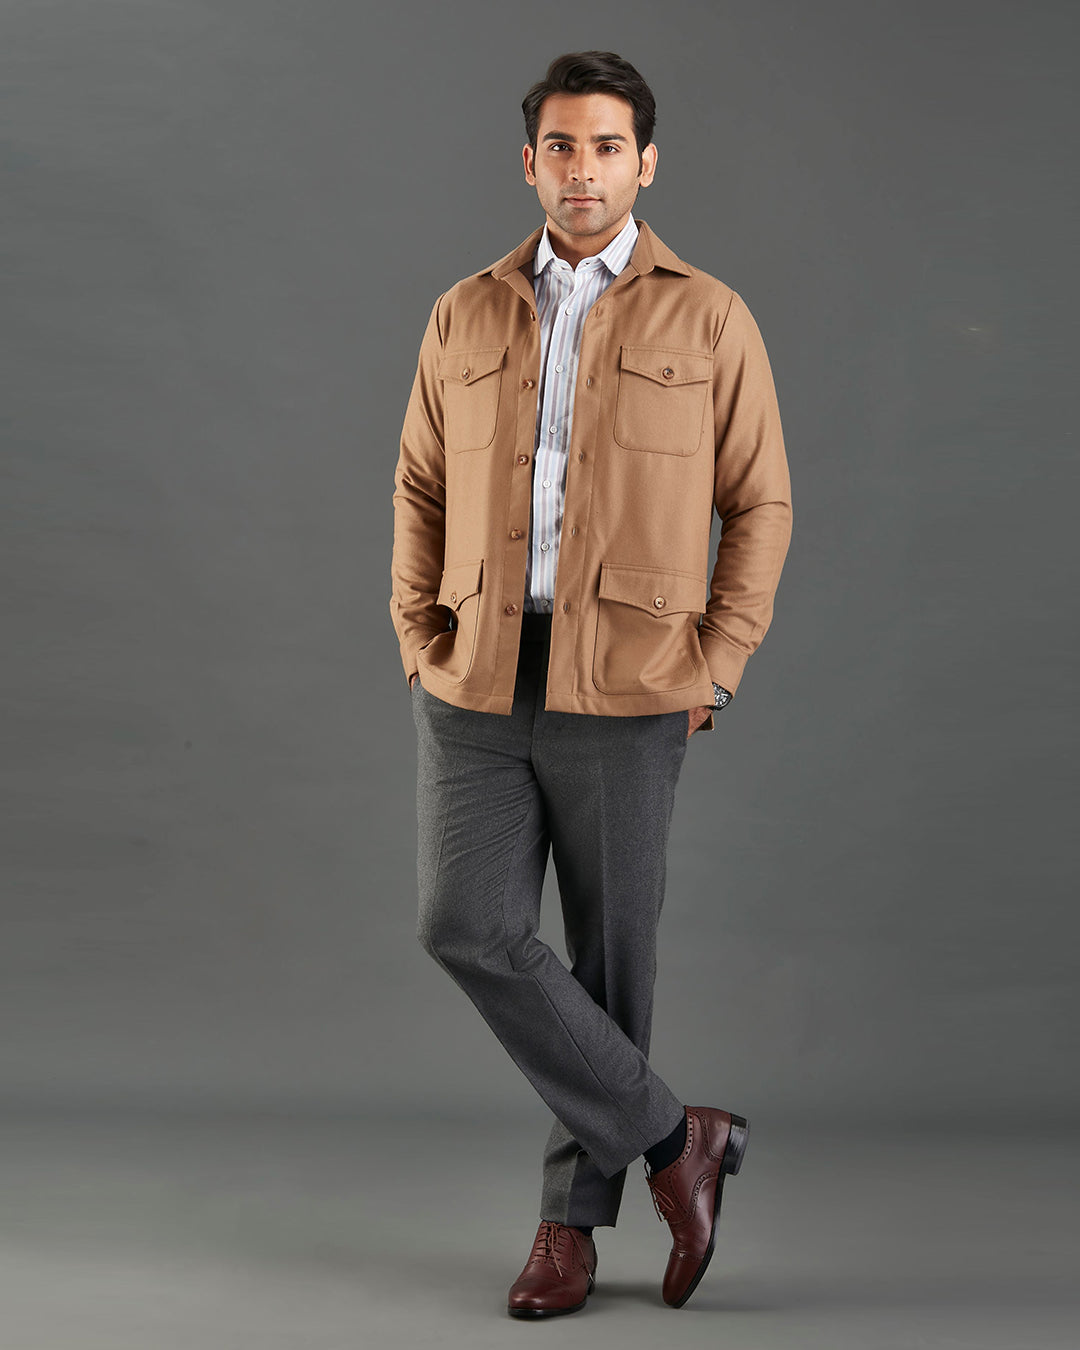 Front of model wearing the woolen flannel shirt jacket for men by Luxire in tan hands in pockets